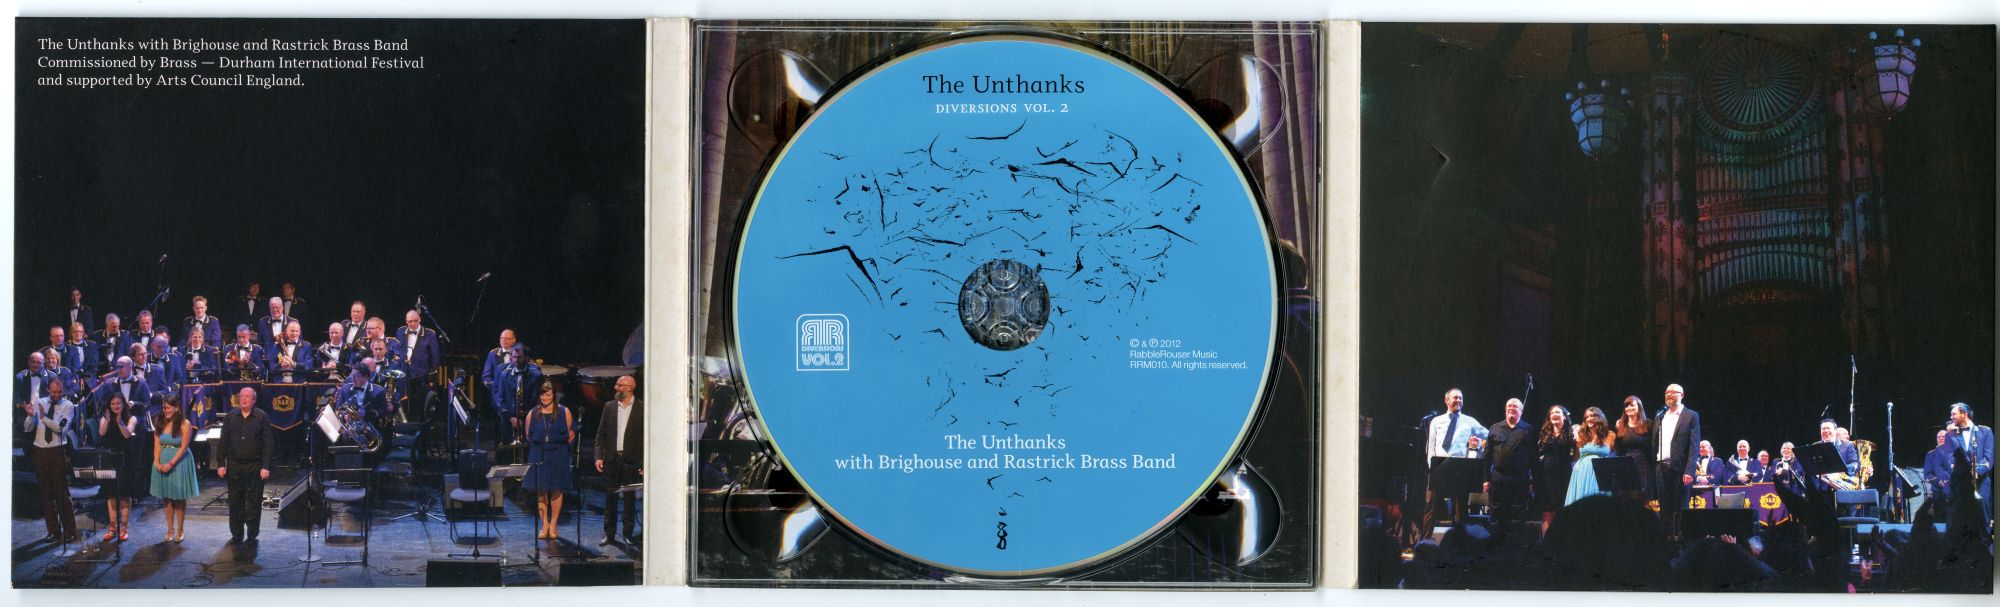 The Unthanks With Brighouse And Rastrick Brass Band『Diversions Vol. 2』02